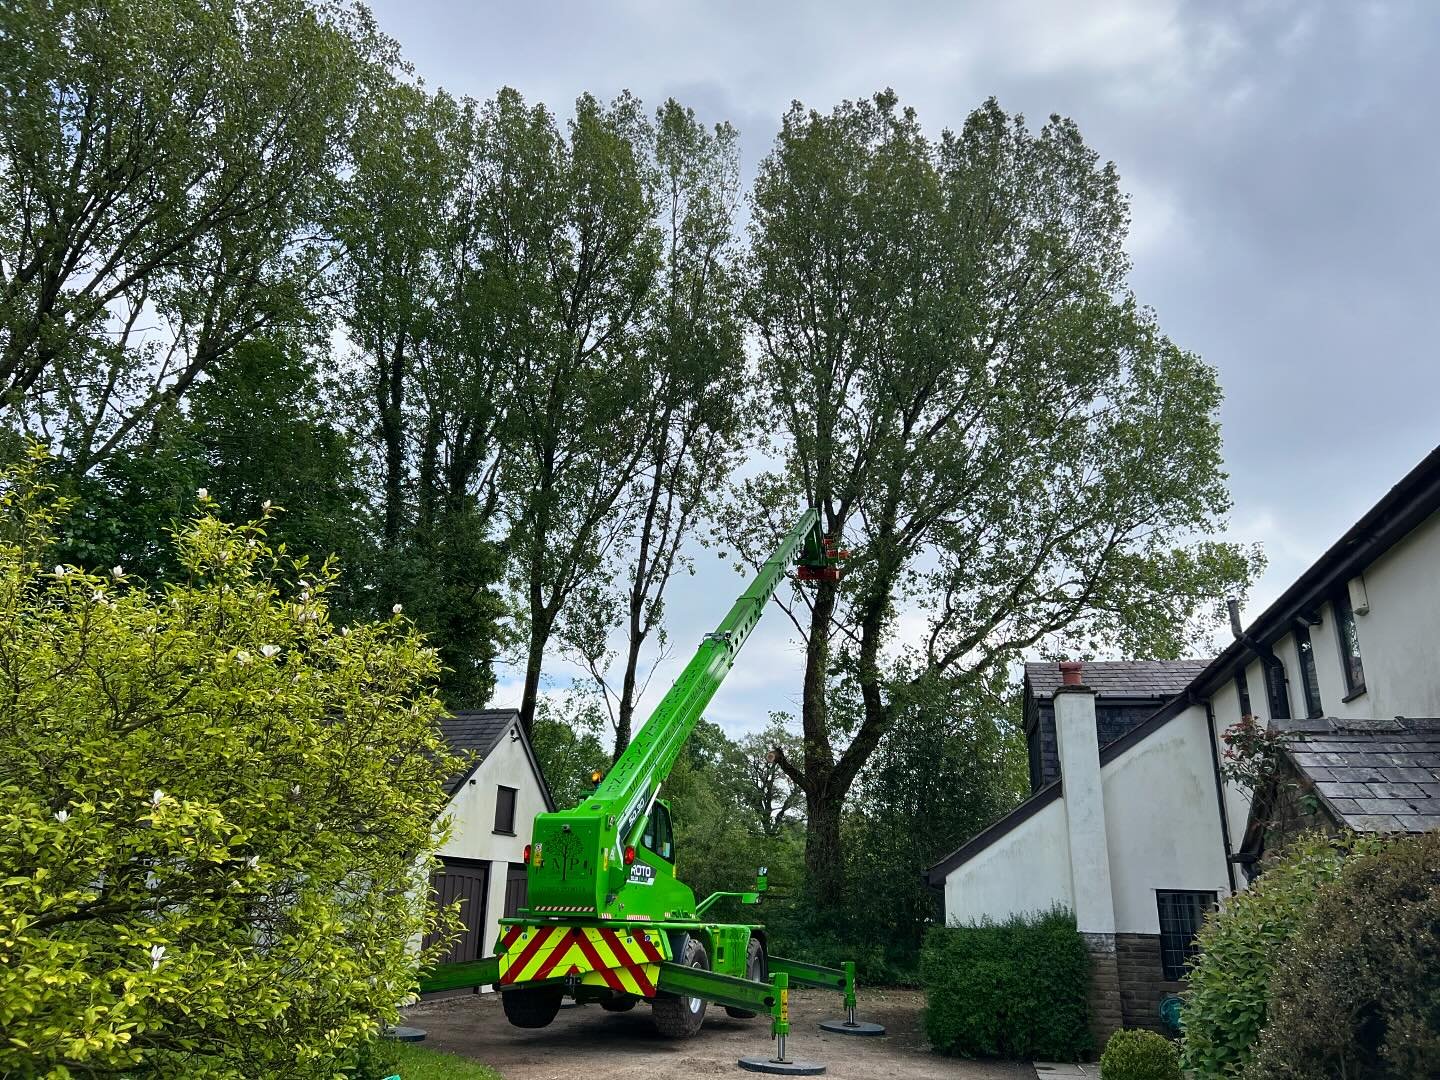 Massive job completed today in Edgworth a very technical job over a garage with limited access! Pollarding 6 huge Poplar 🌳&rsquo;s and a few other smaller trees pruned and removed. Big shout out to @mptreecaremanagementltd for the Merlo Rota 50.30 a